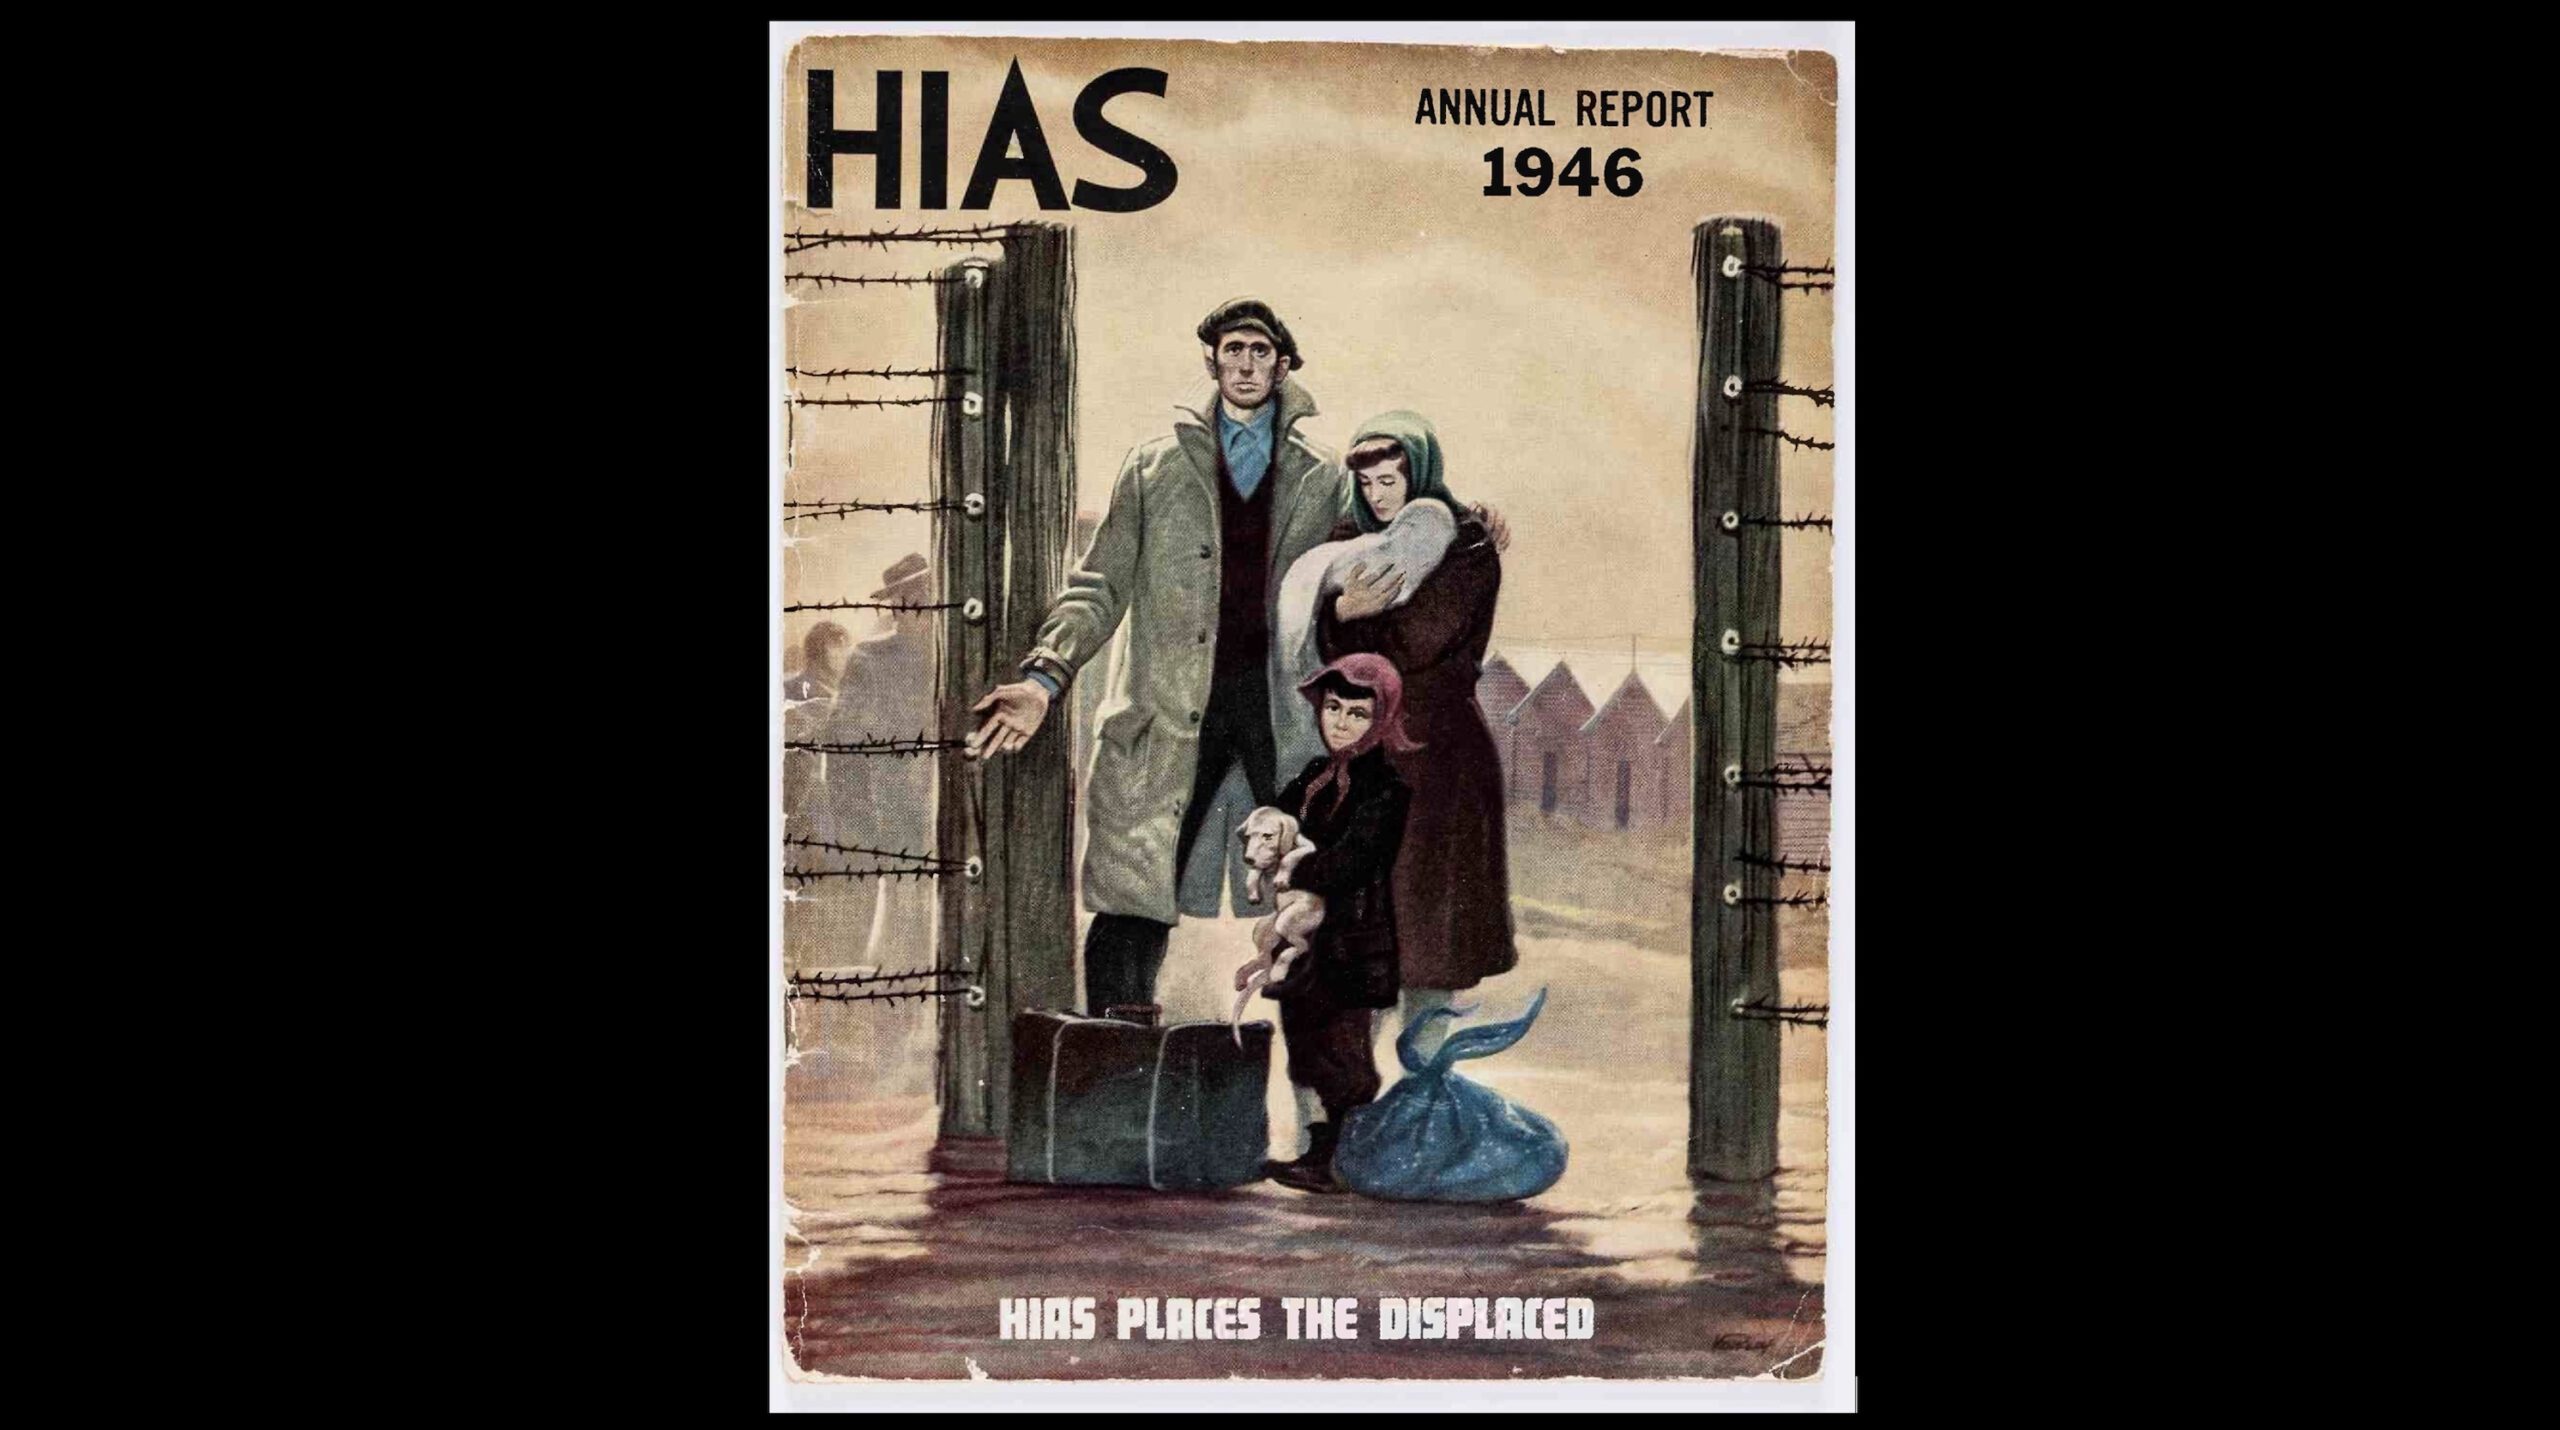 HIAS' History - The World's Oldest Refugee Protection Organization